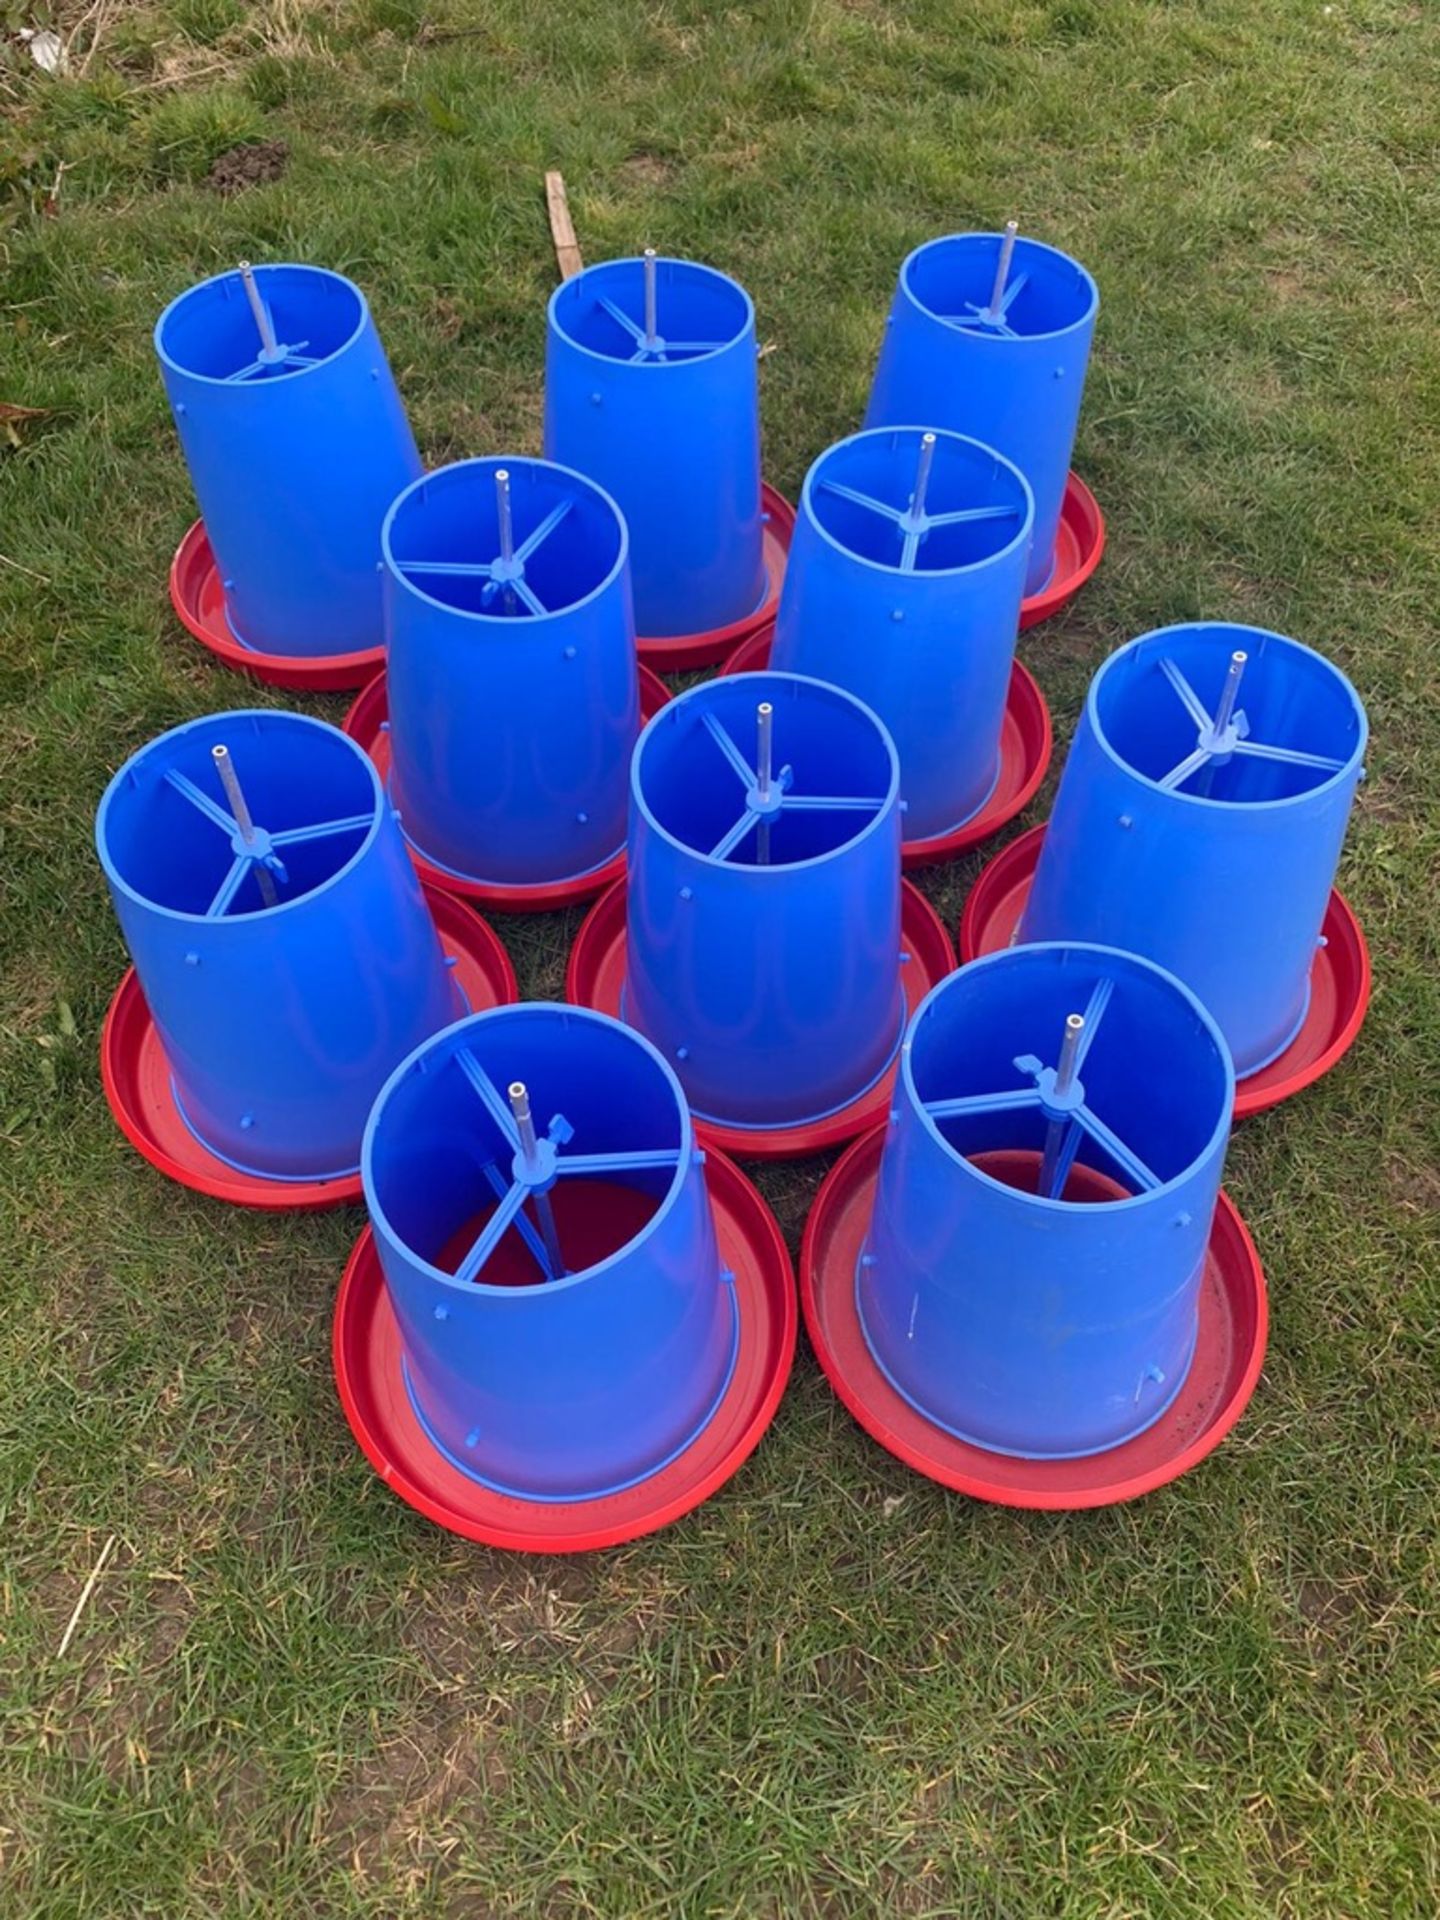 10 x Manola Feeders complete with black cover top - Image 2 of 2